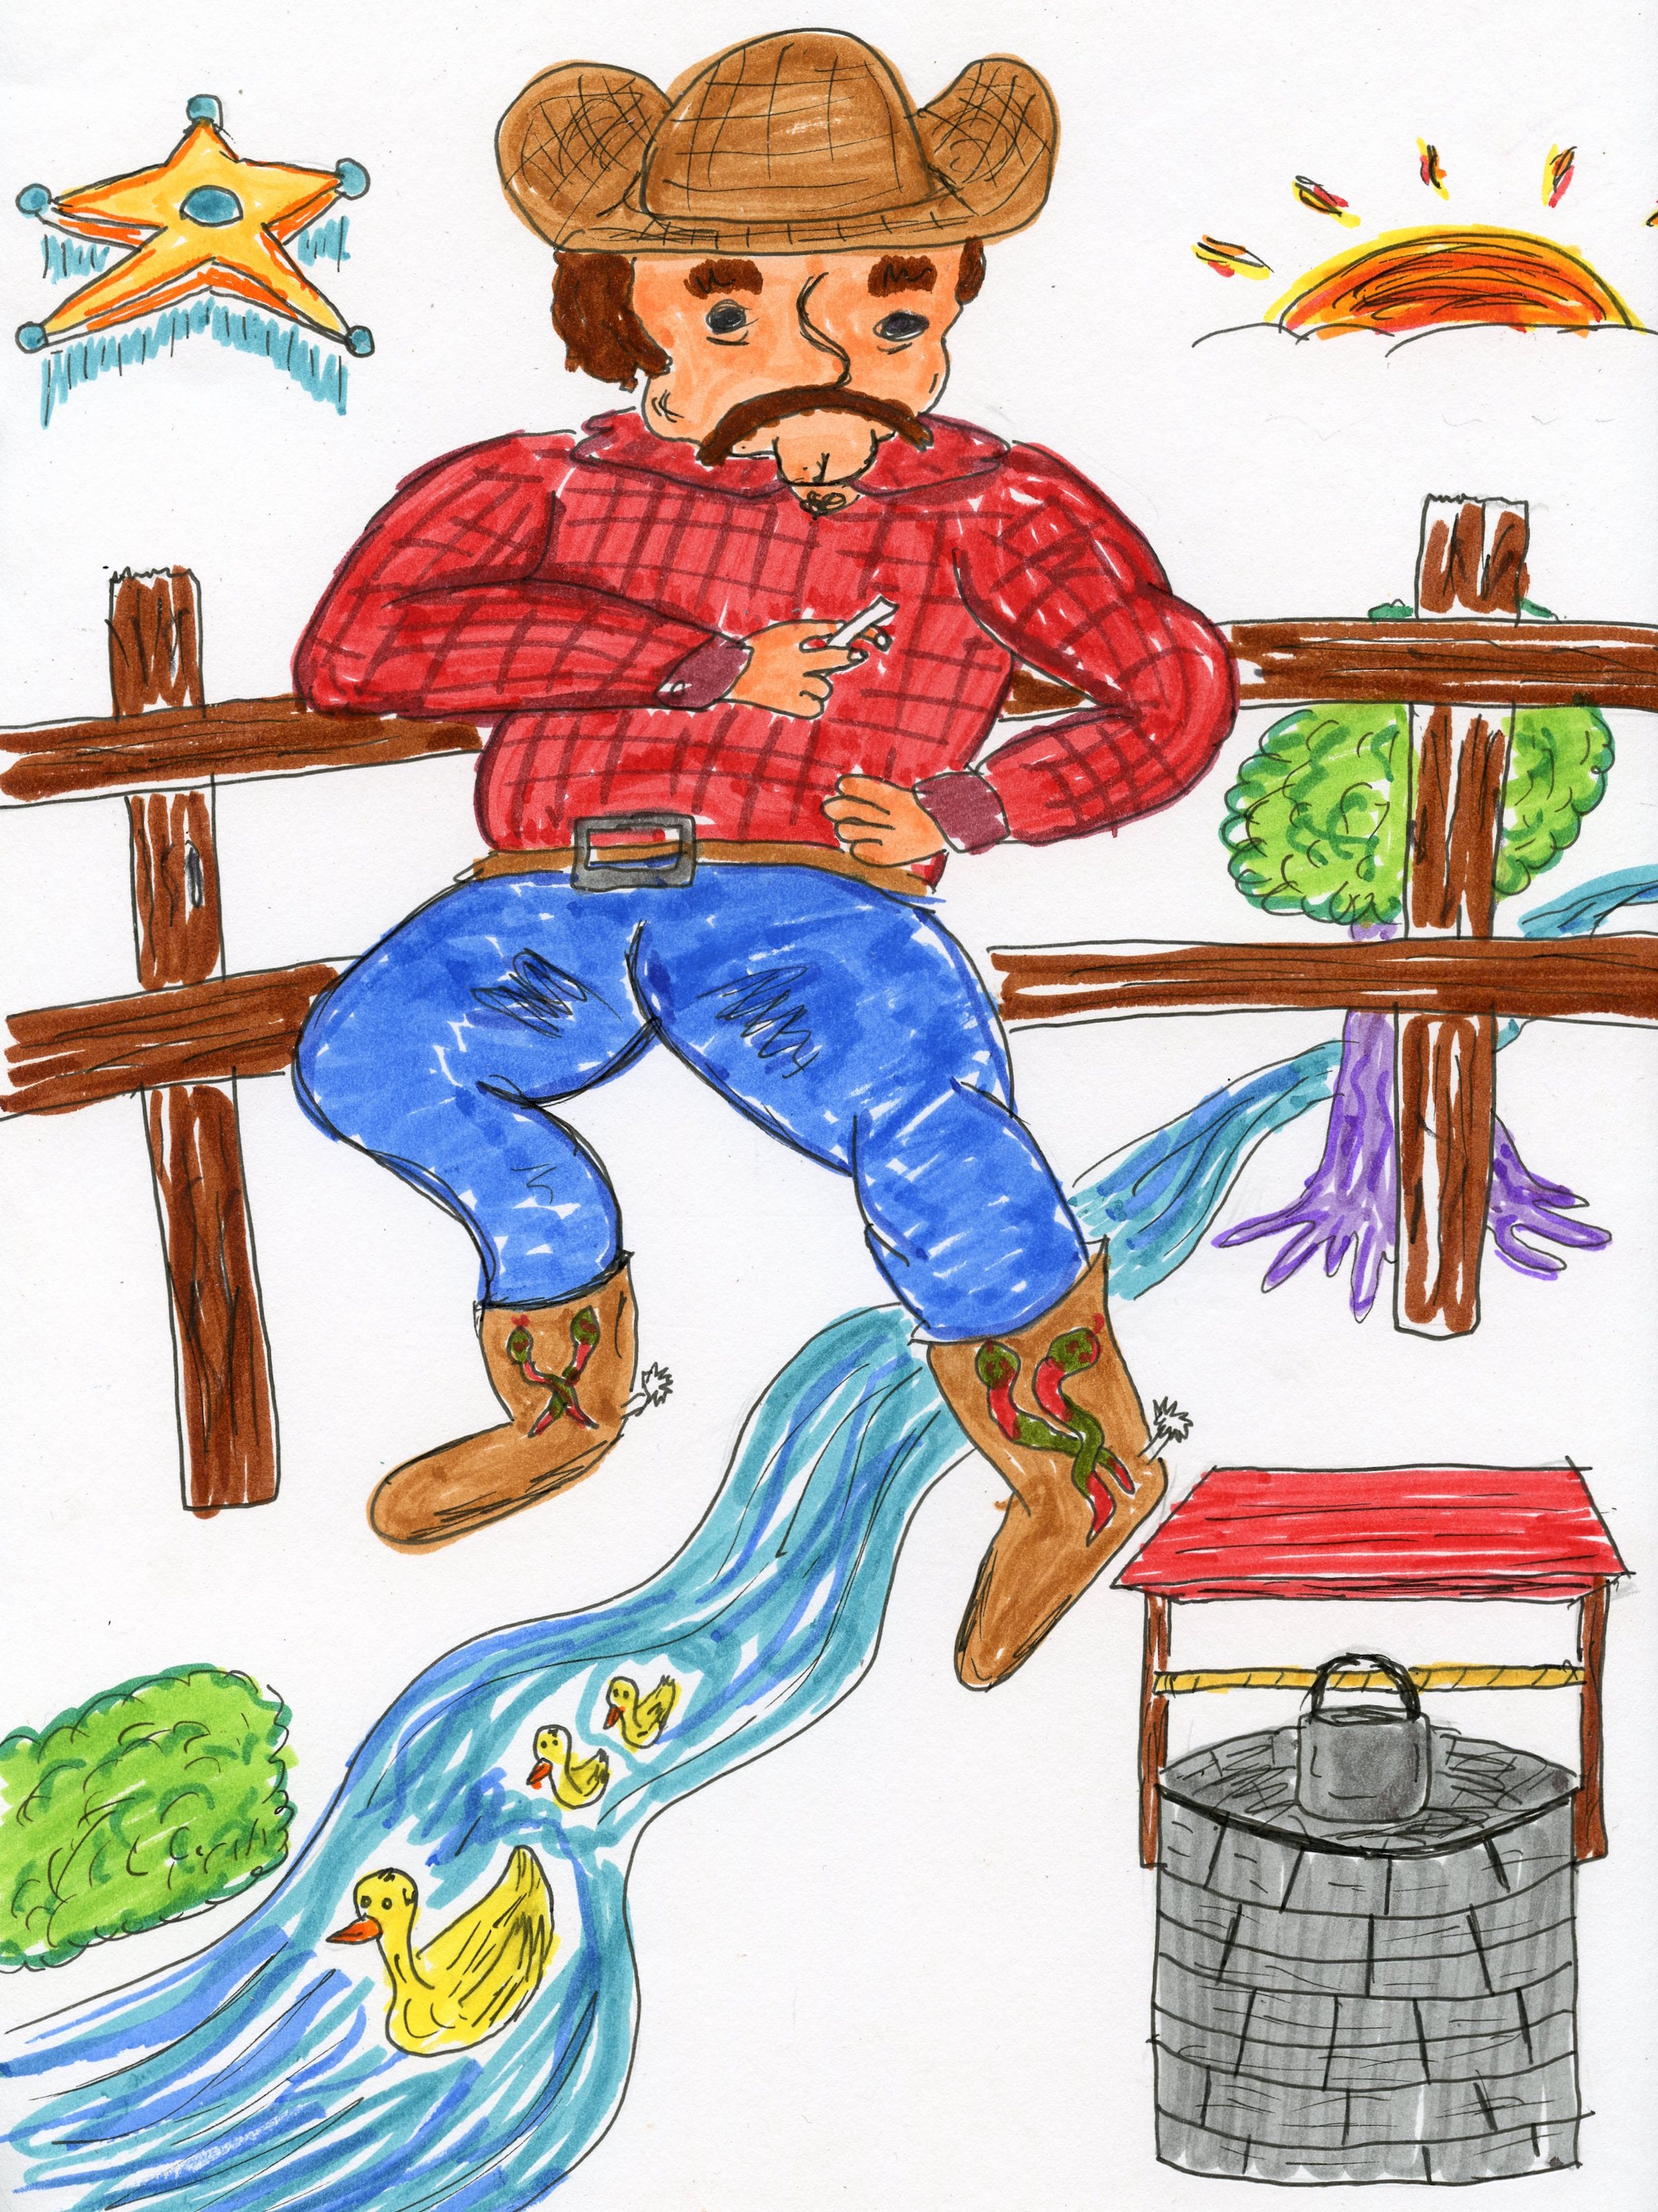  Jordan Hebert •&nbsp;Bucks County, PA   This drawing is a portrait of Pete Blister. Paul Bunyan’s cousin of the west. He’s the undeclared caretaker of the land. He put his life on the line to protect the needs of all things natural and asked for not